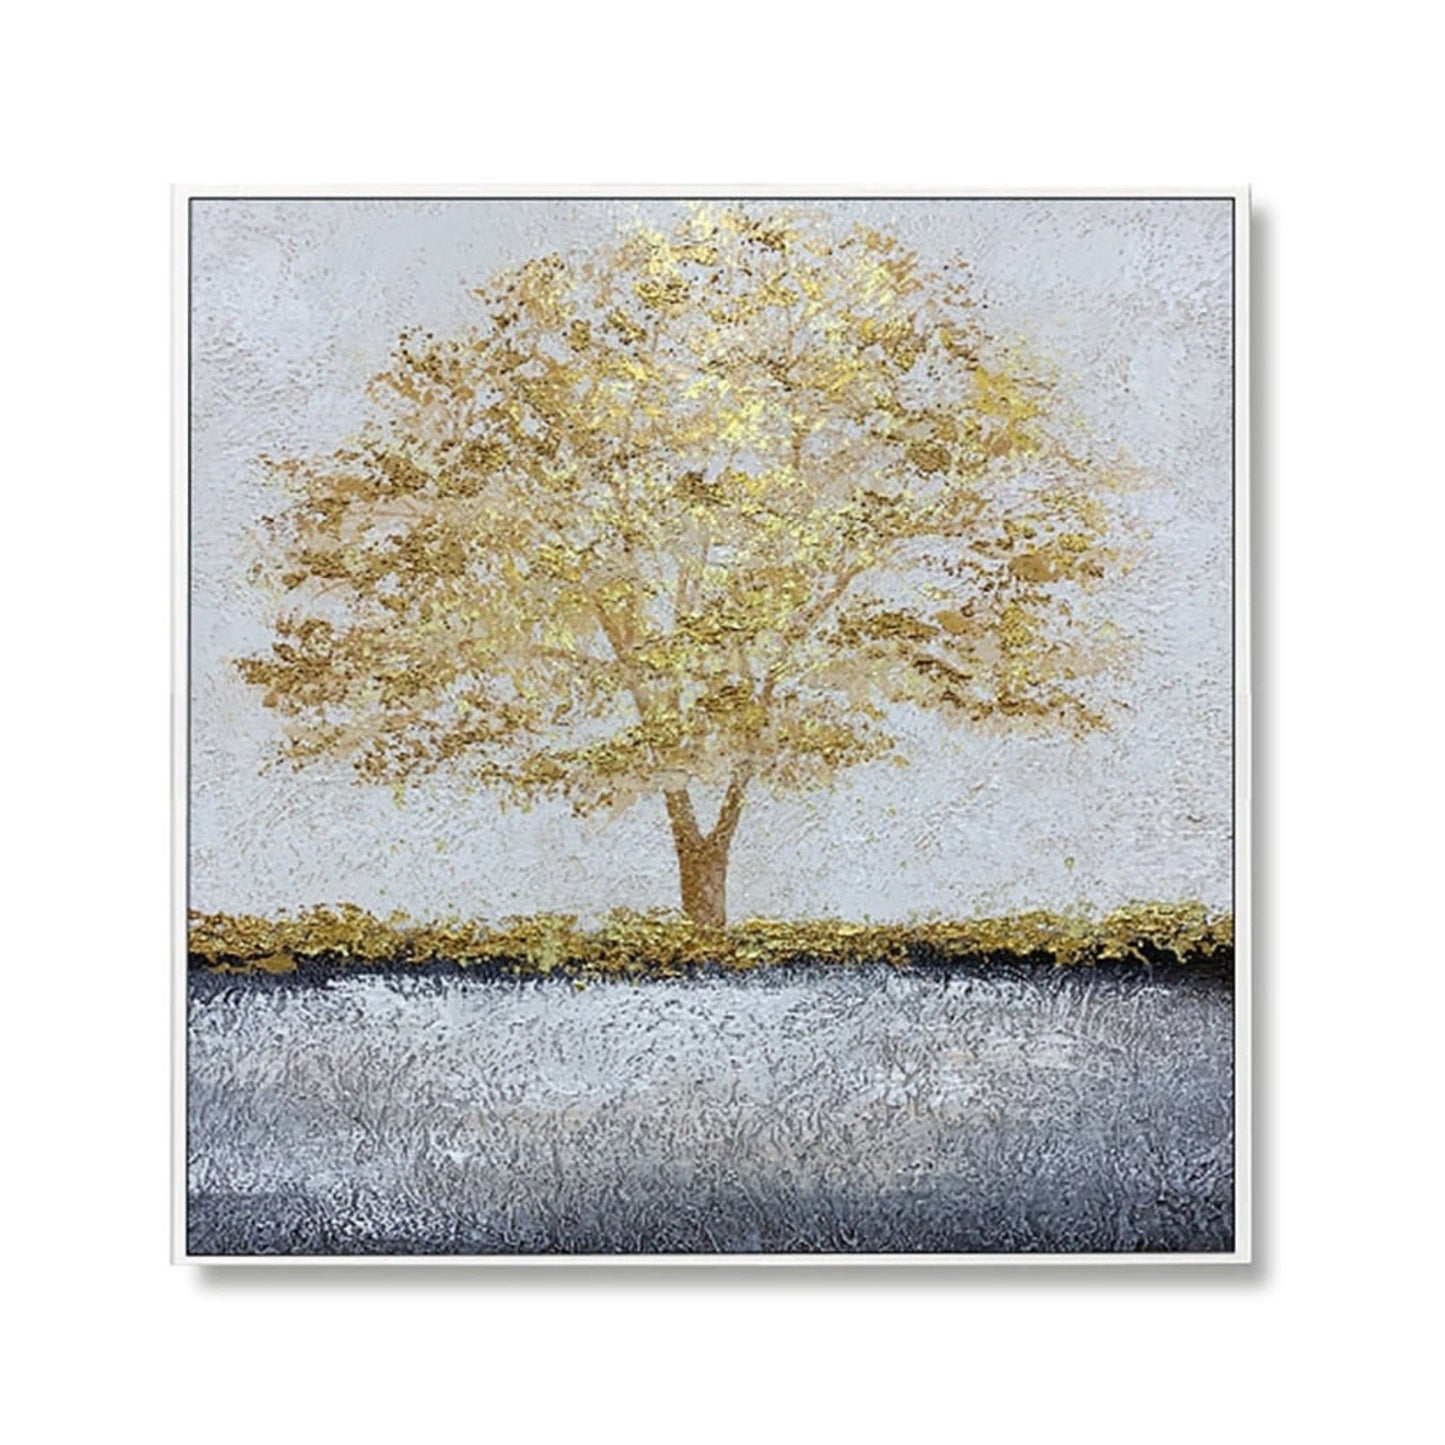 Textured Golden Tree Abstract Landscape Painting